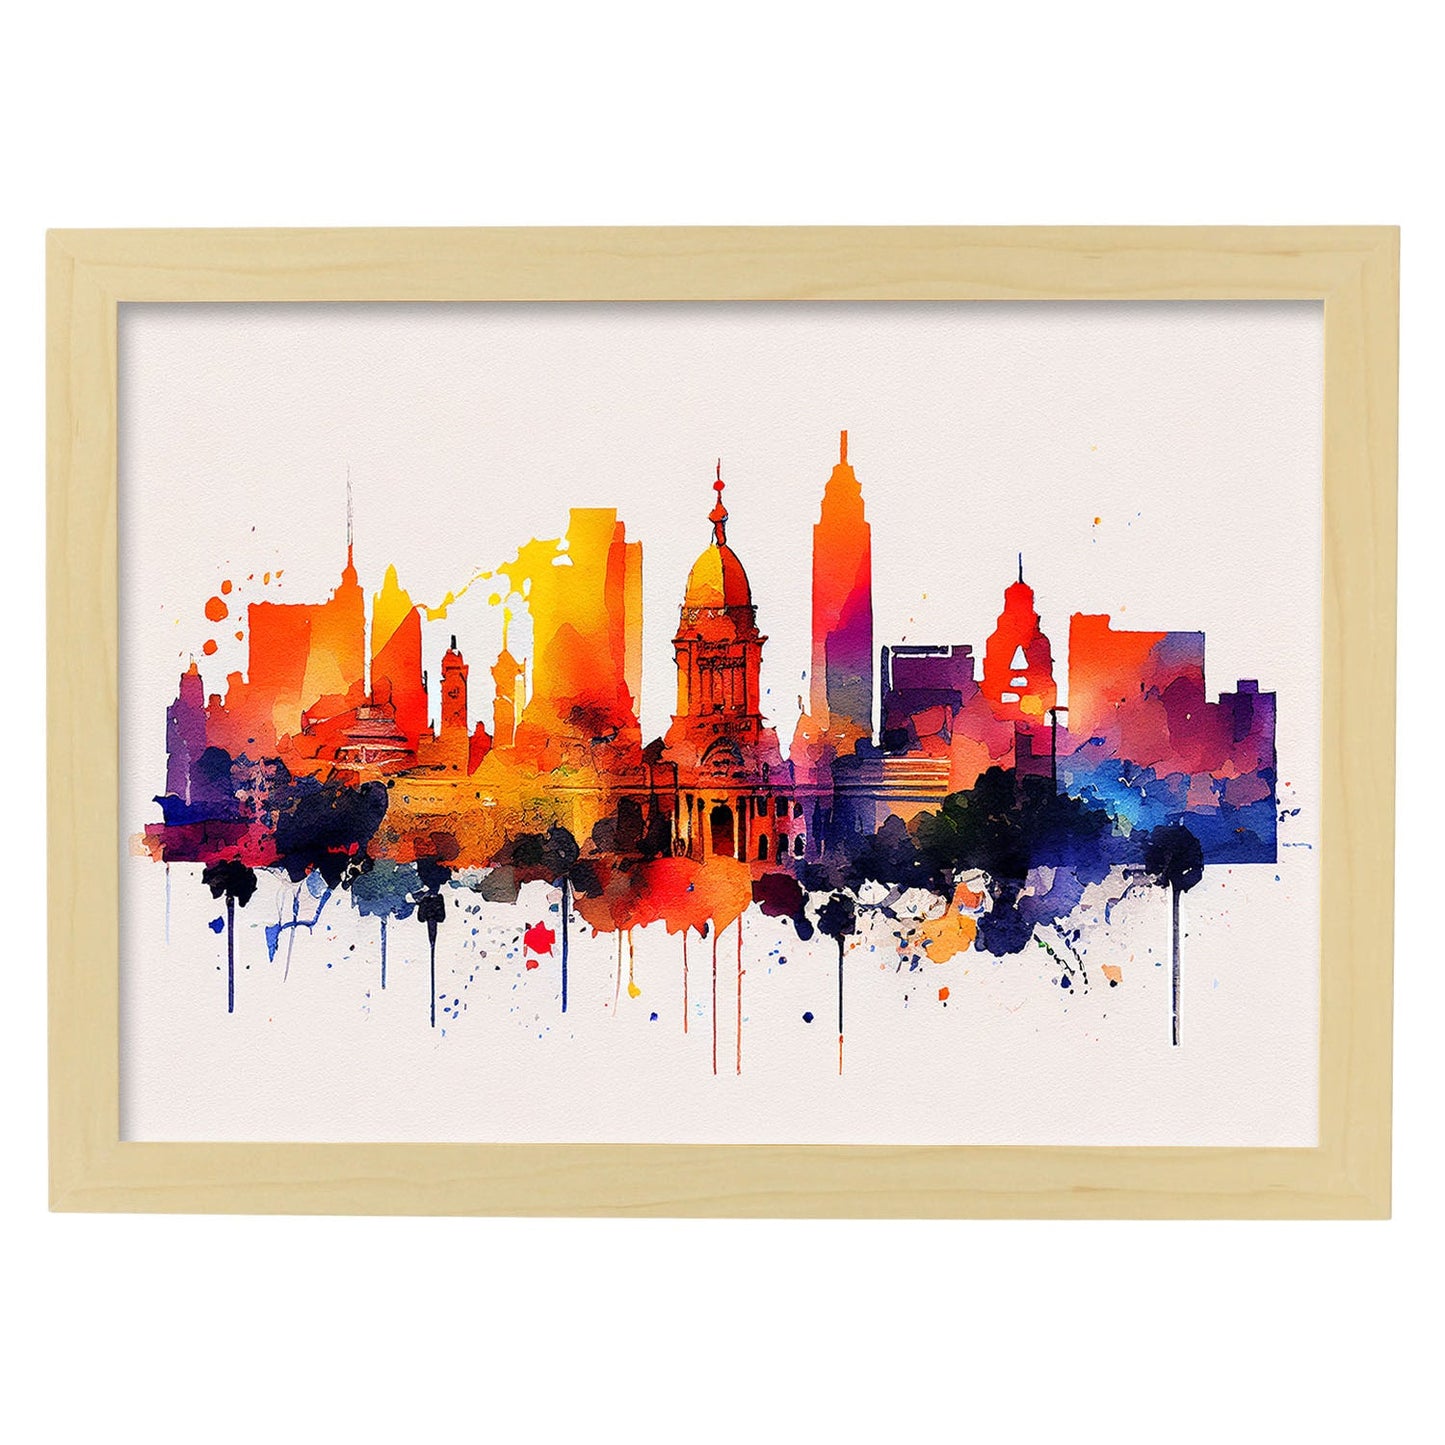 Nacnic watercolor of a skyline of the city of Buenos Aires_2. Aesthetic Wall Art Prints for Bedroom or Living Room Design.-Artwork-Nacnic-A4-Marco Madera Clara-Nacnic Estudio SL